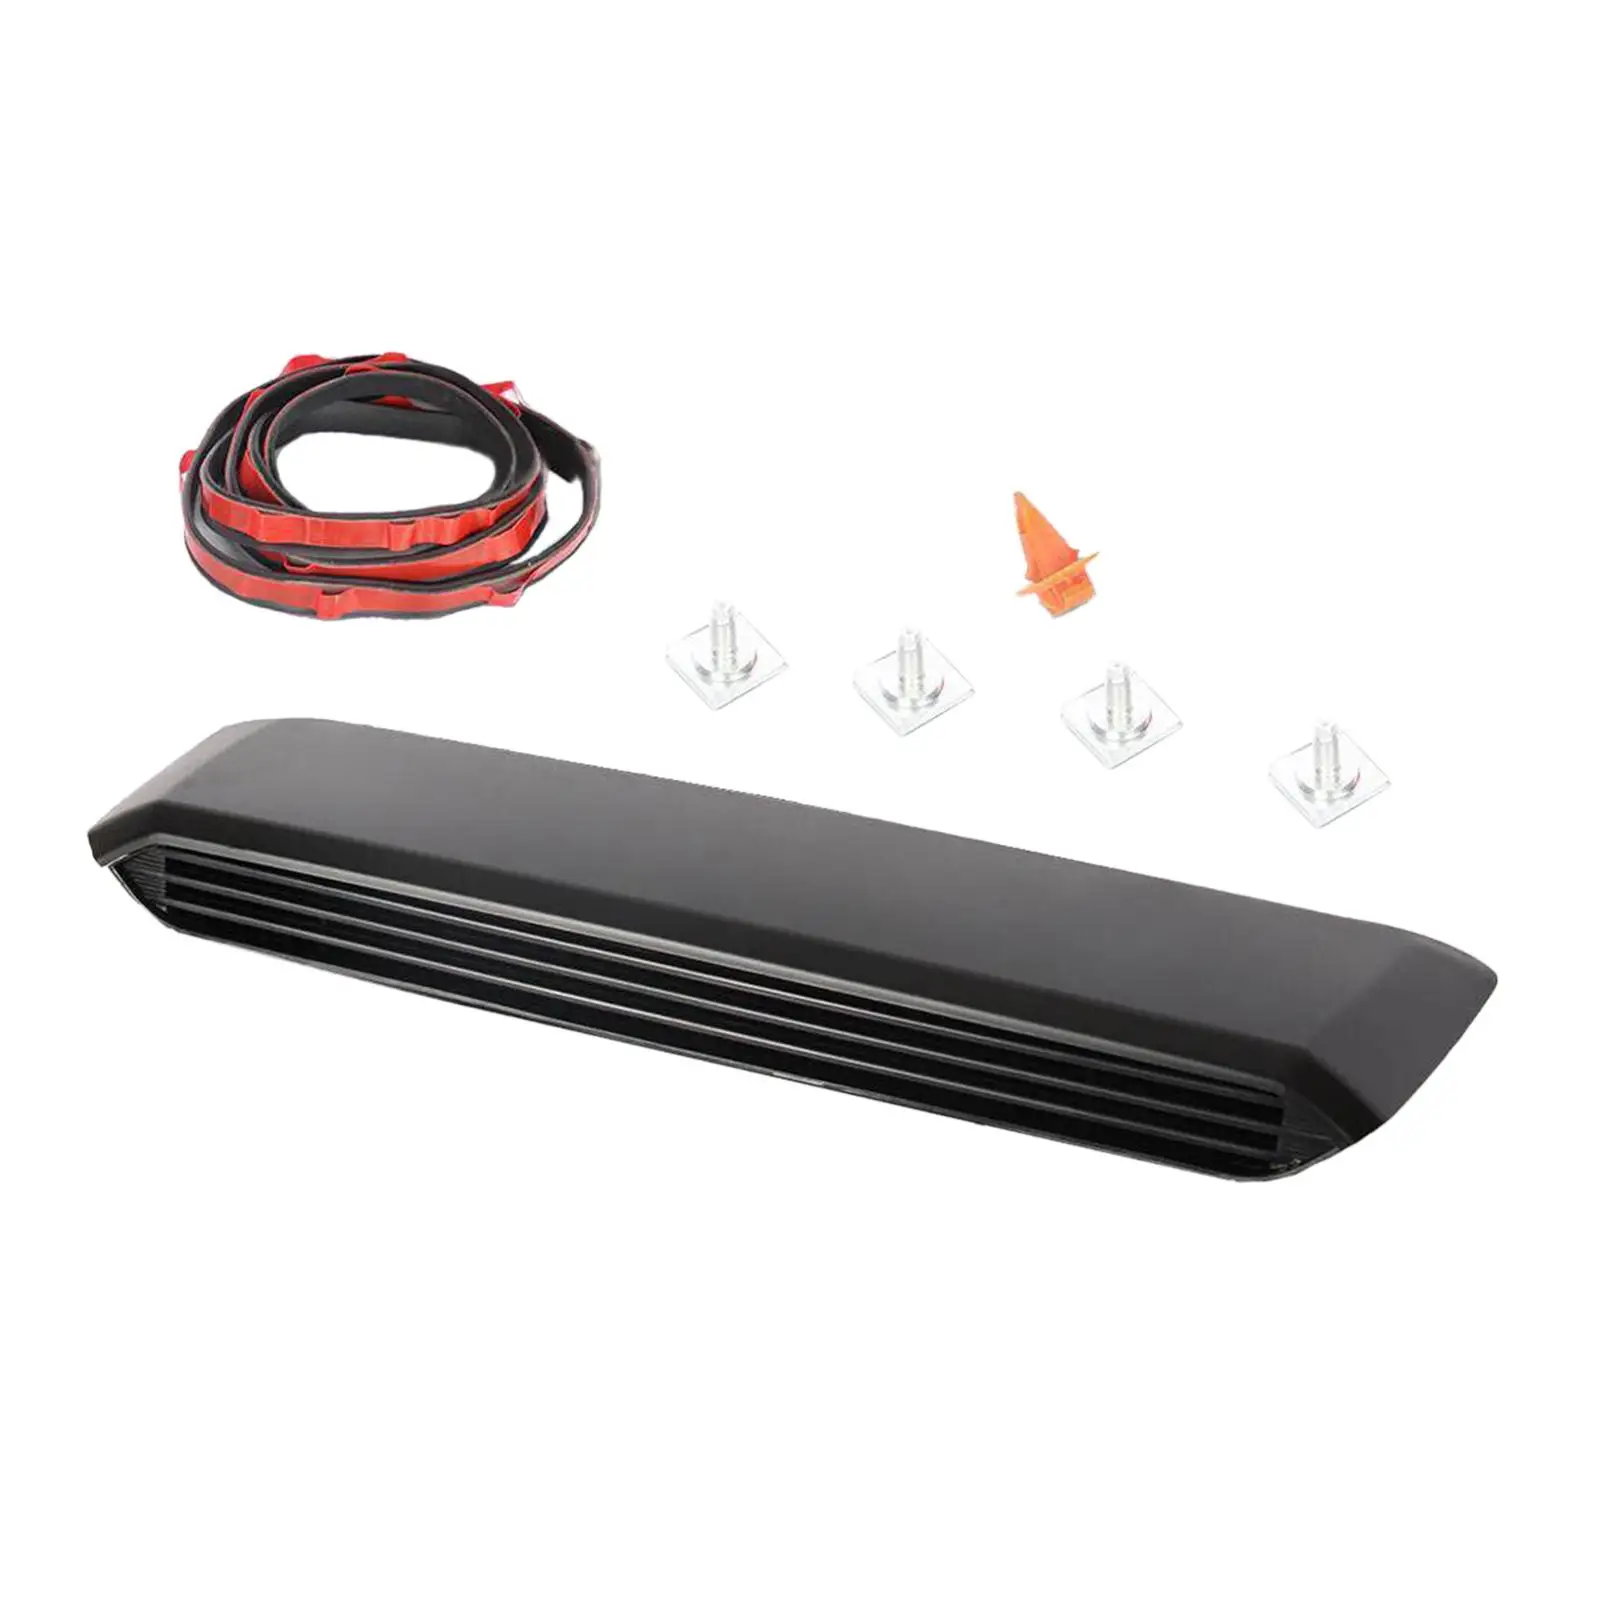 Hood Scoop Kit Premium Durable High Performance Easy to Install 76181-04900 Car